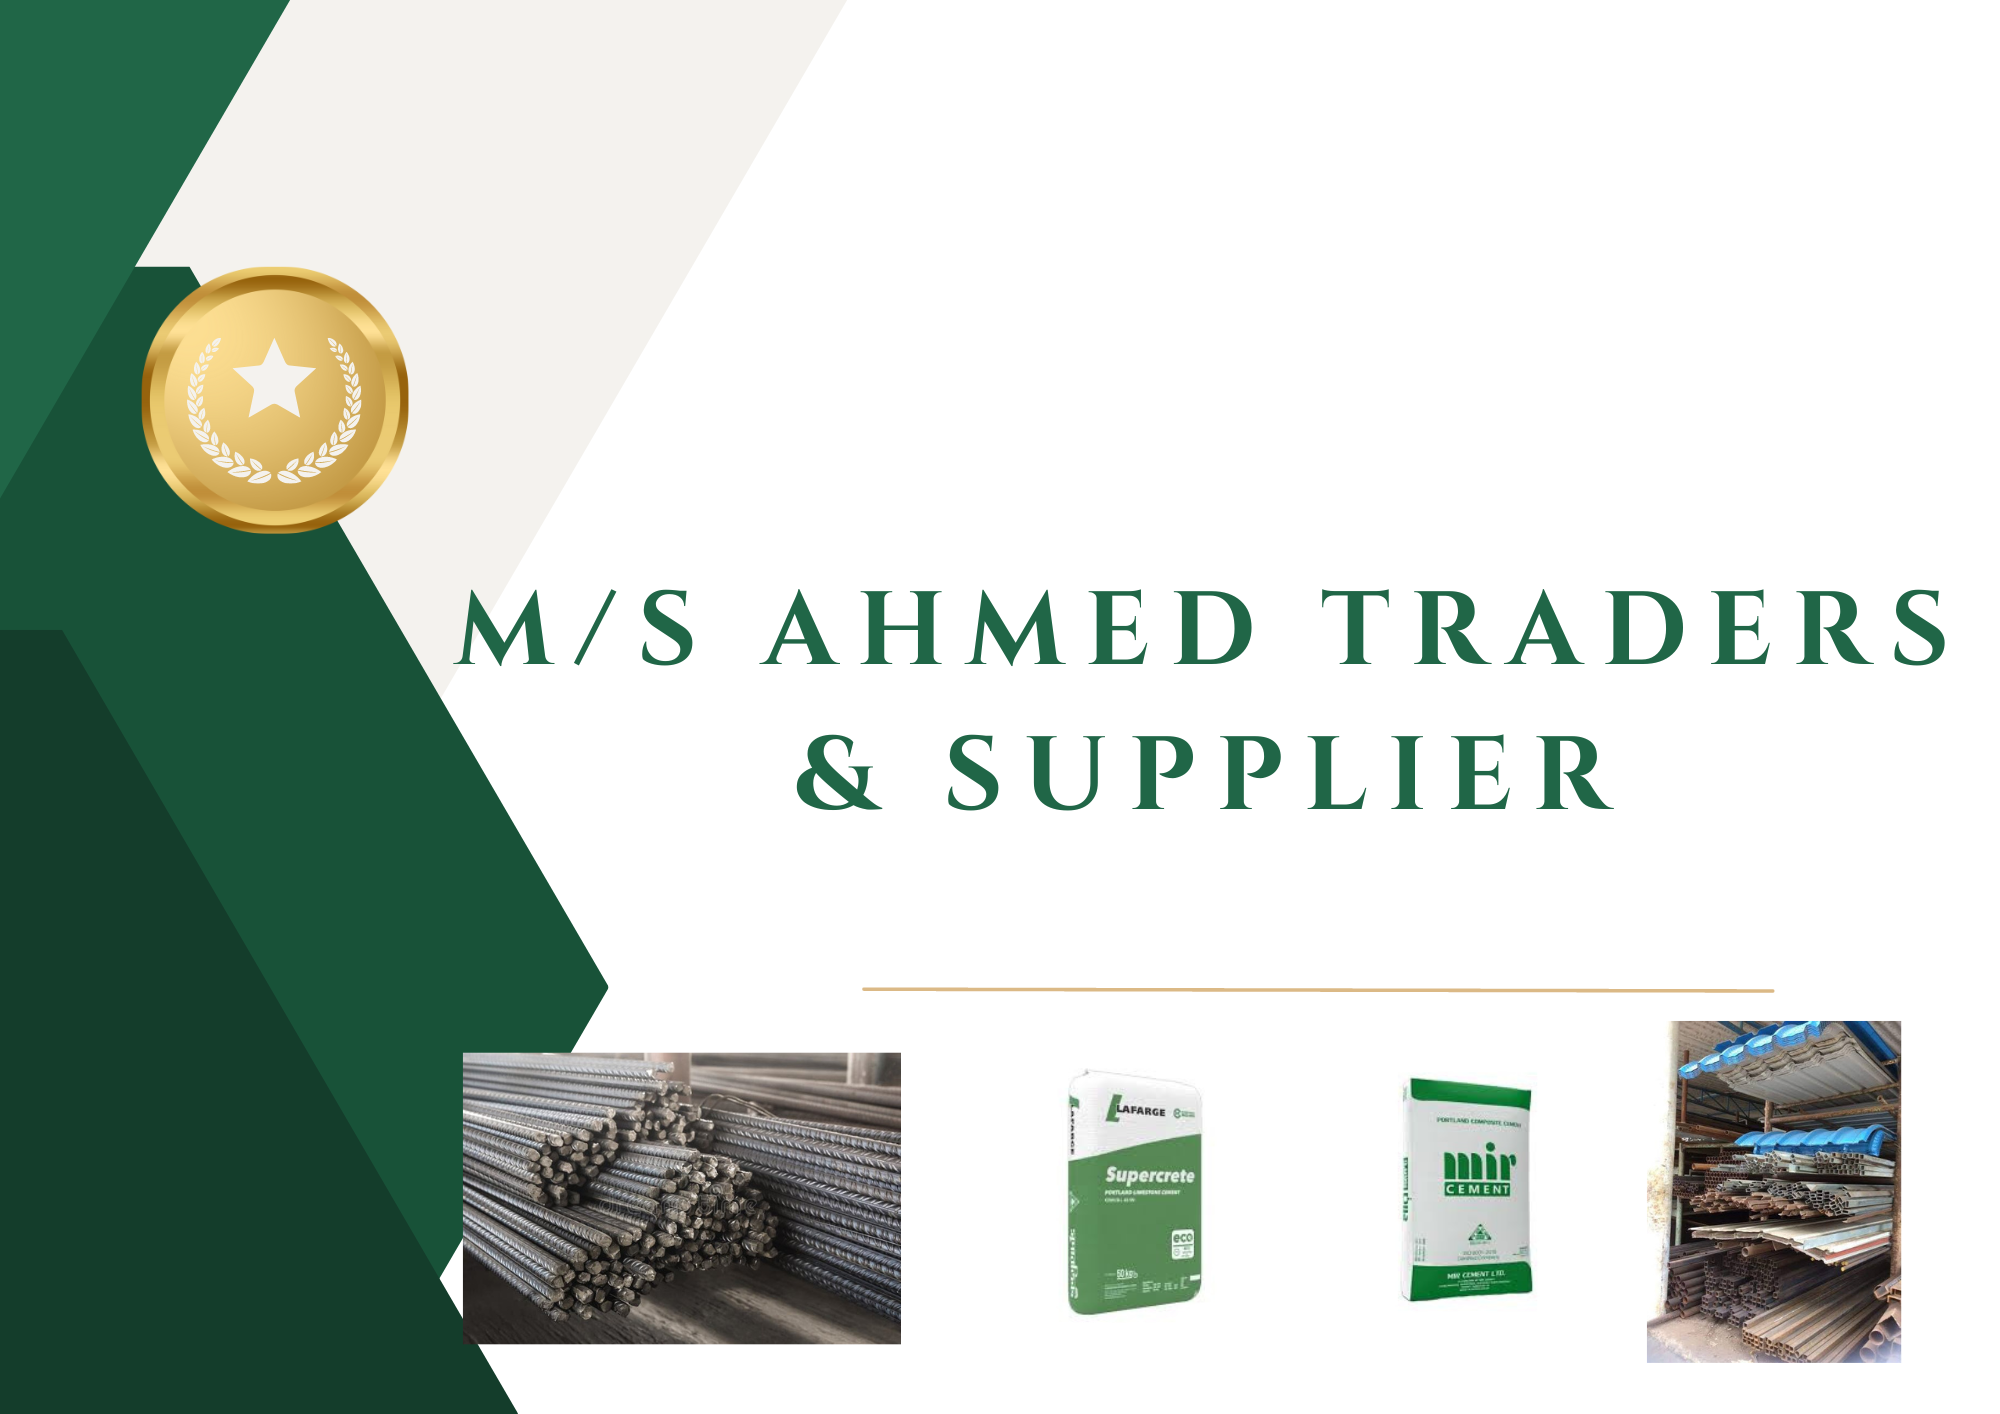 Ms Ahmed traders & supplier_20230812_210948_0000